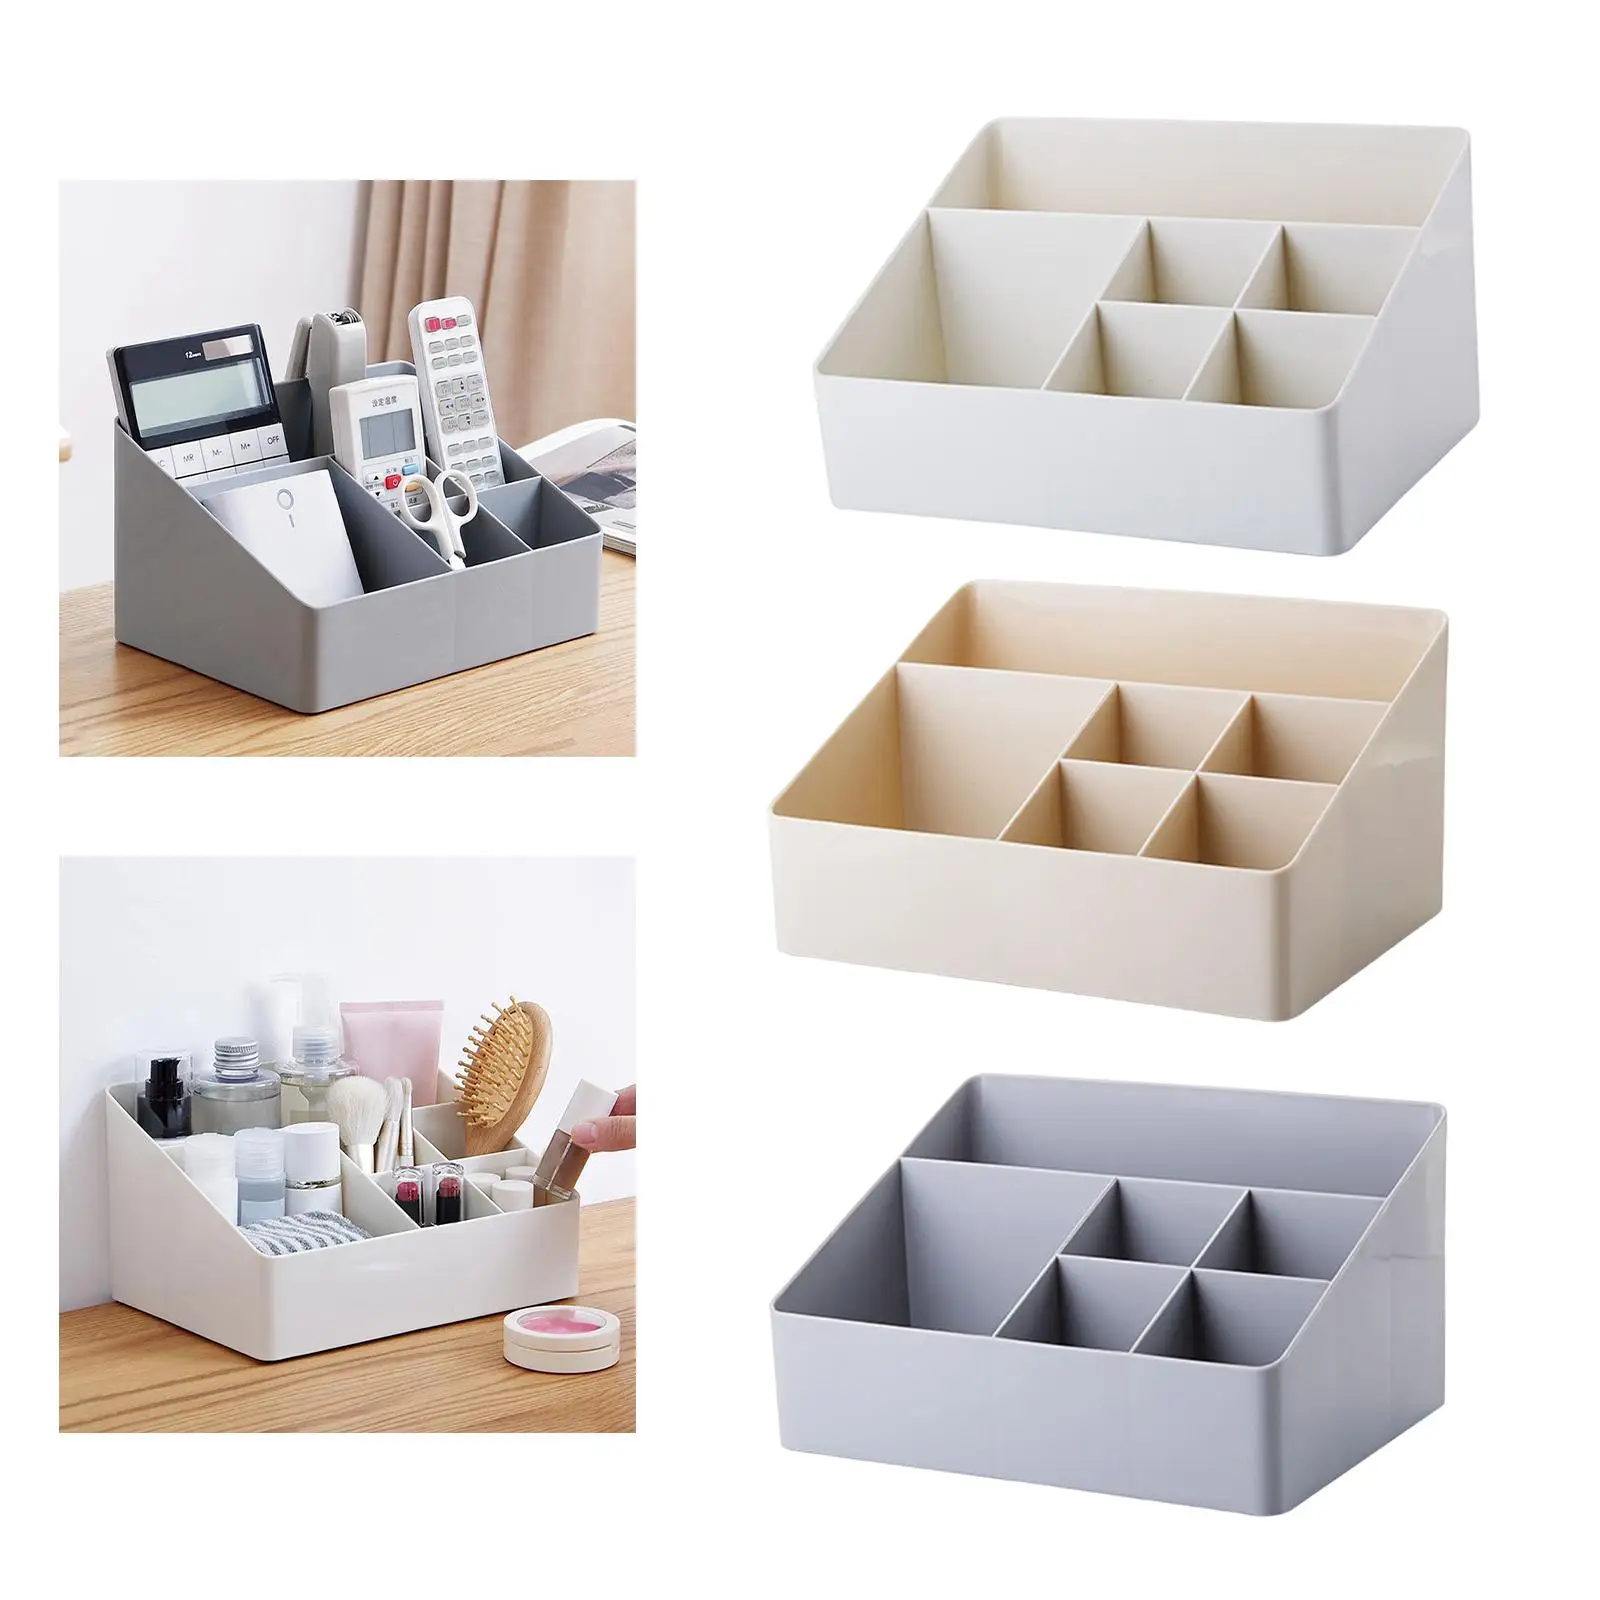 Cosmetic Storage Box Skin Care Shelf Multi Function Large Capacity Makeup Desk Organizer Container for Bathroom Home Nail Polish